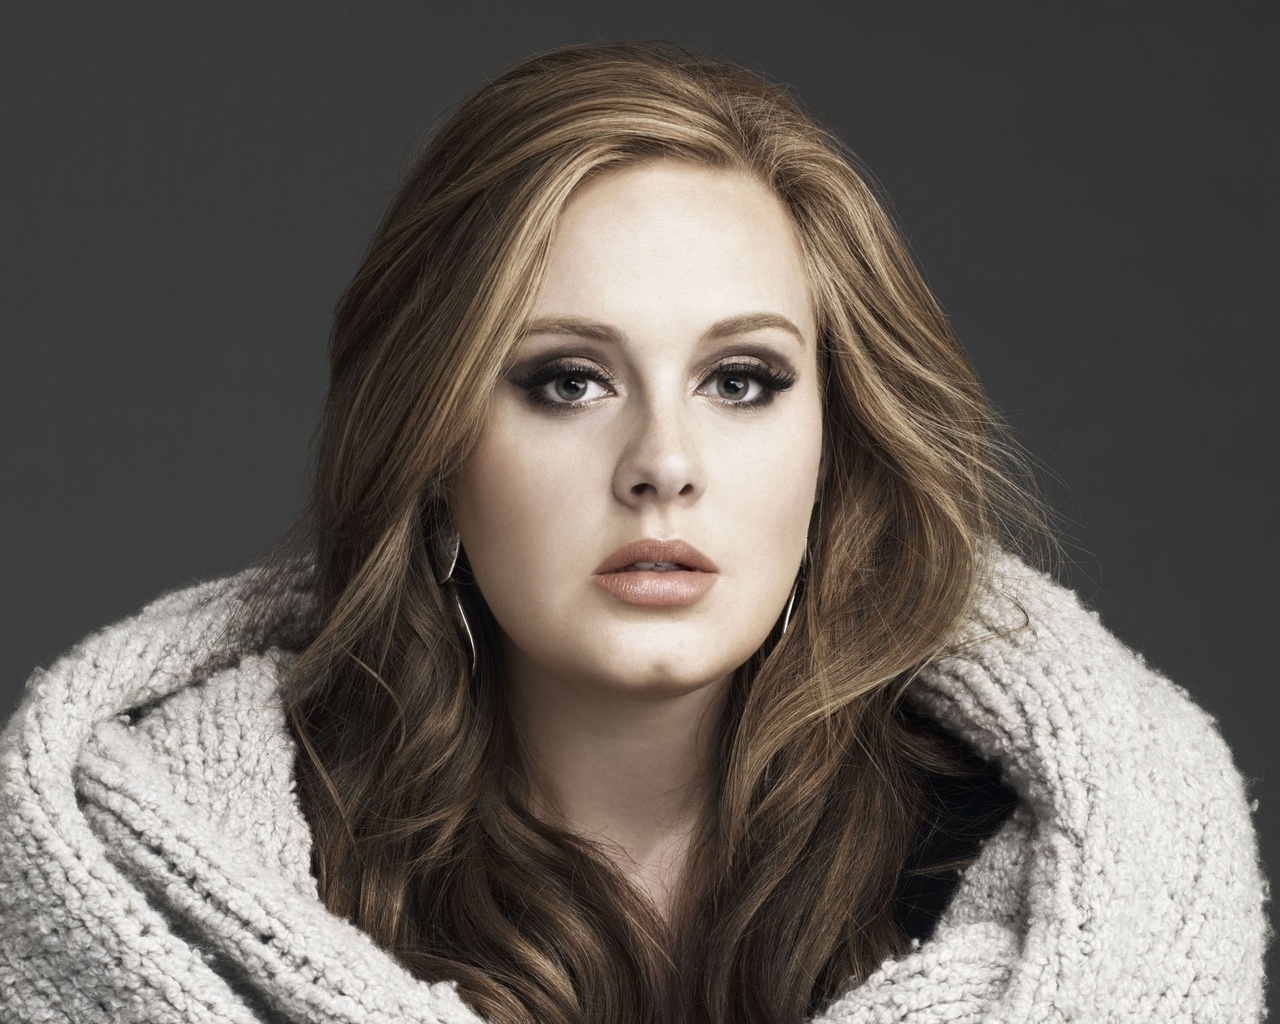 Adele Serious Look for 1280 x 1024 resolution